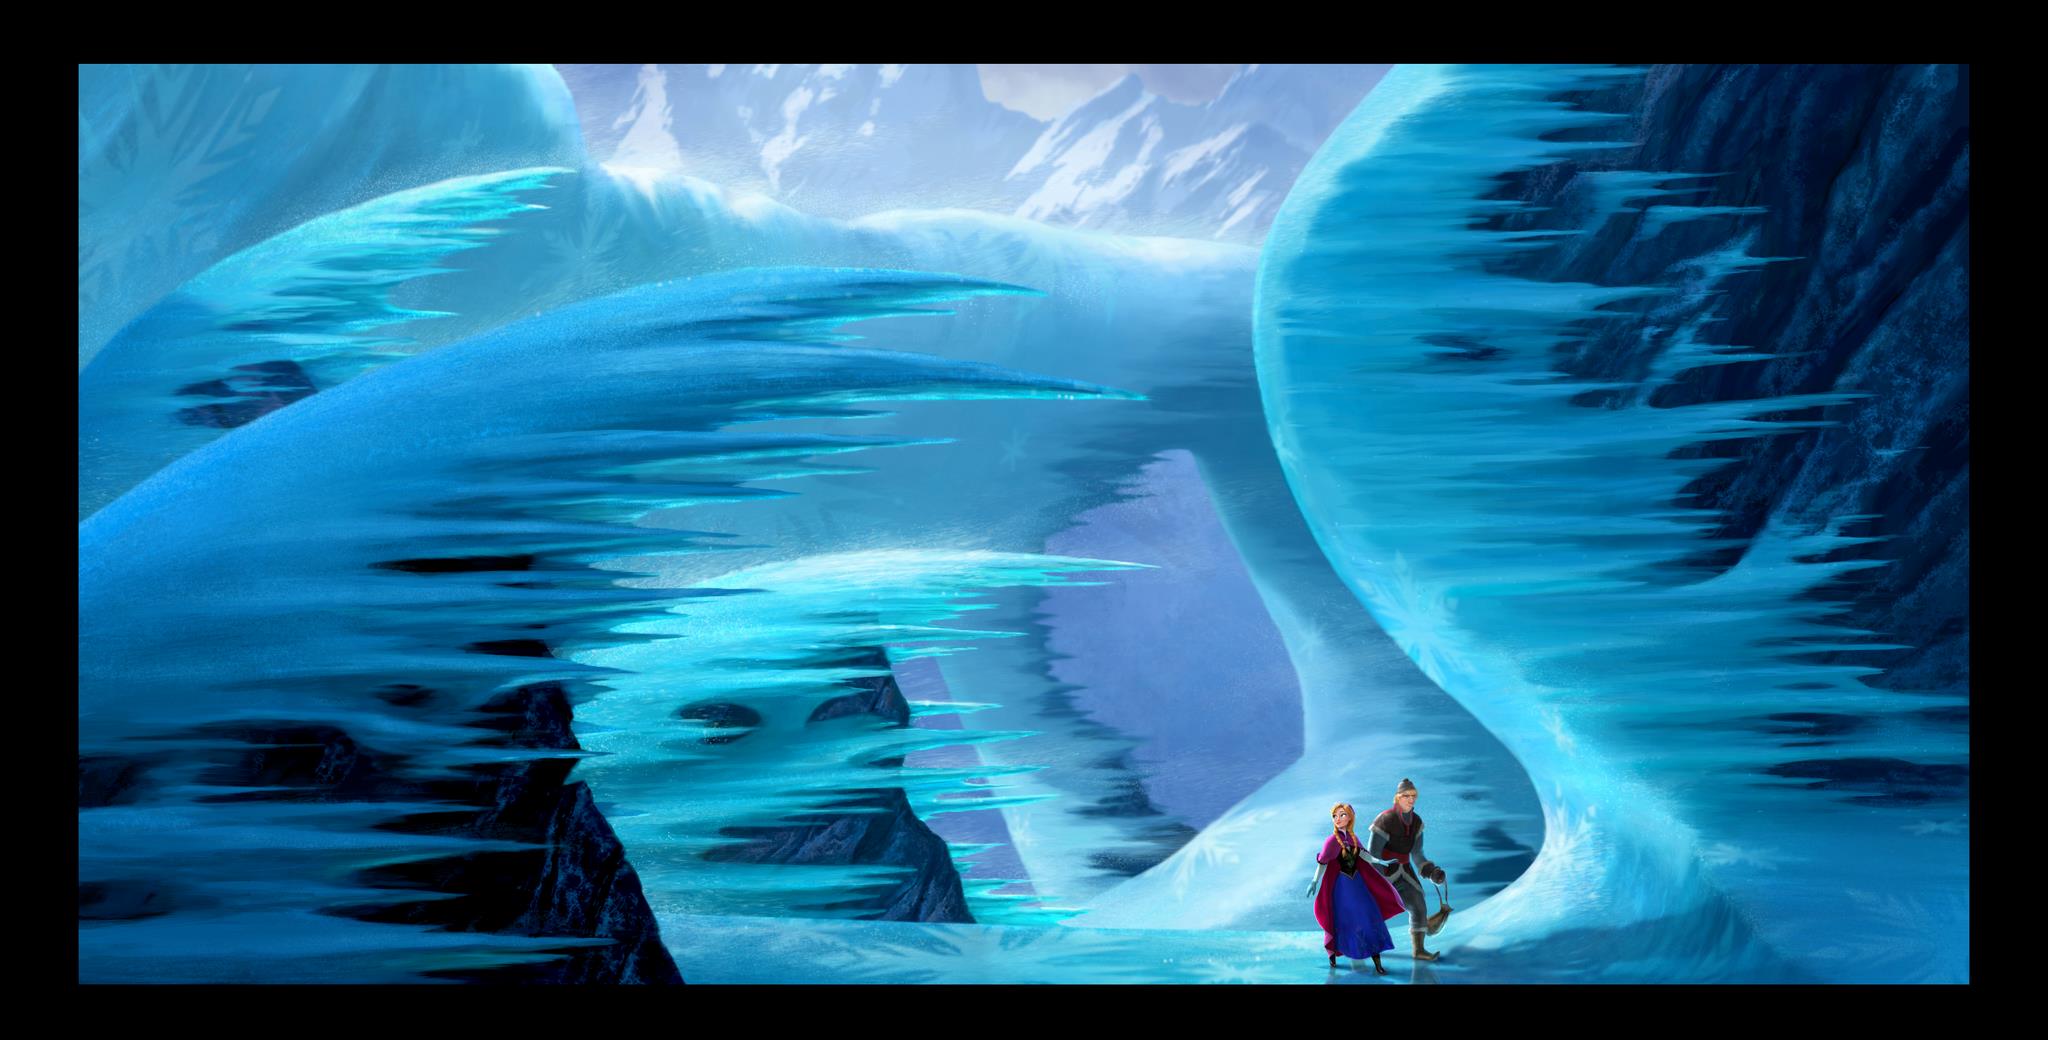 New Art From Disneys Frozen   Spinoff Online   TV Film and